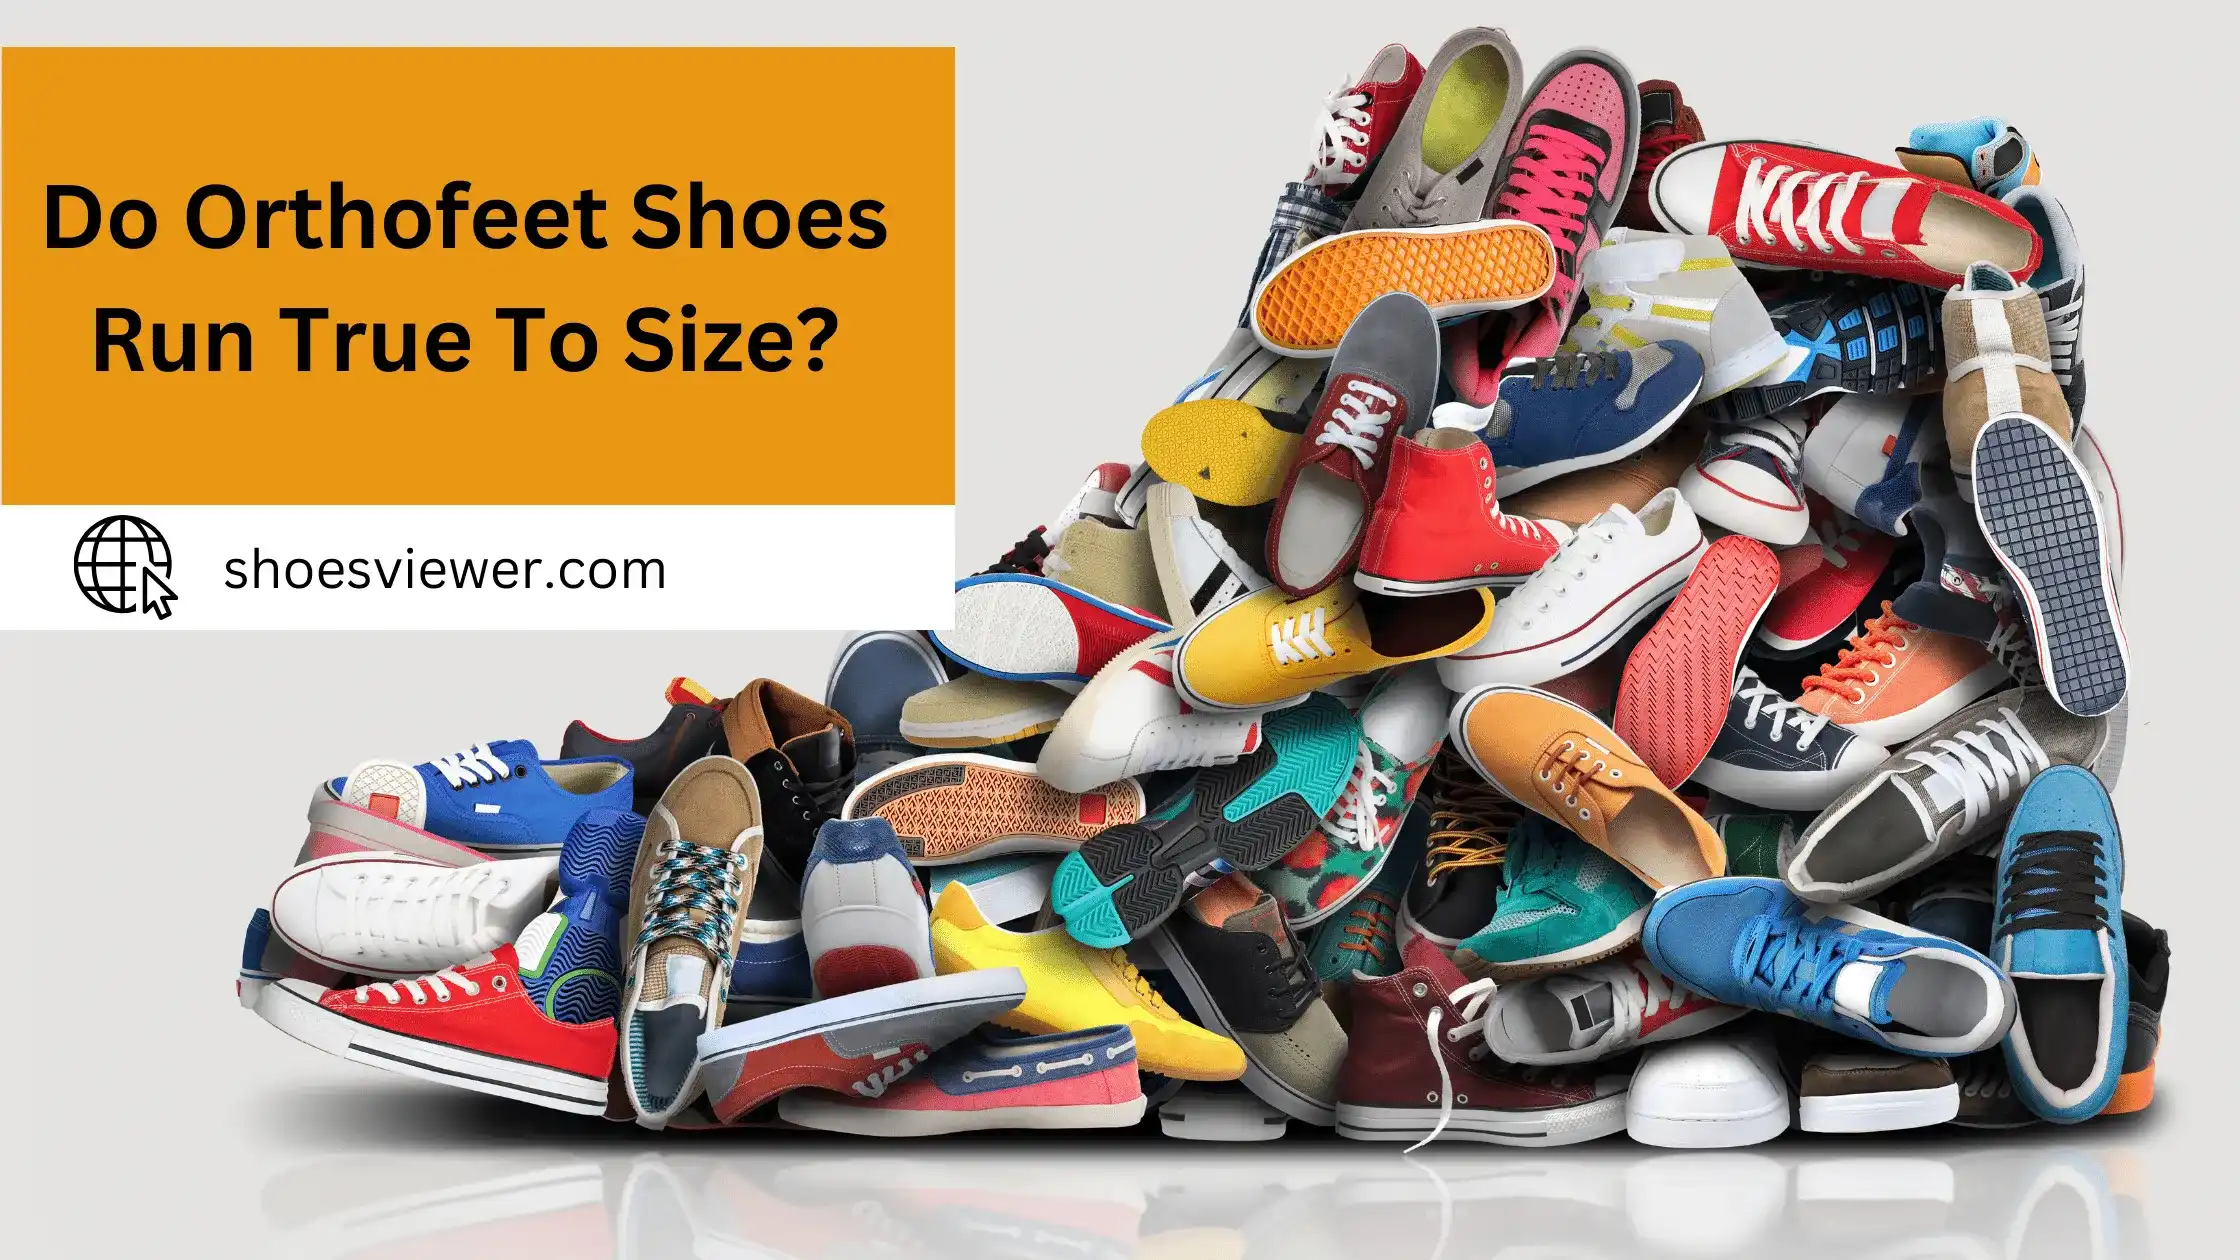 Do Orthofeet Shoes Run True To Size? Best Explained